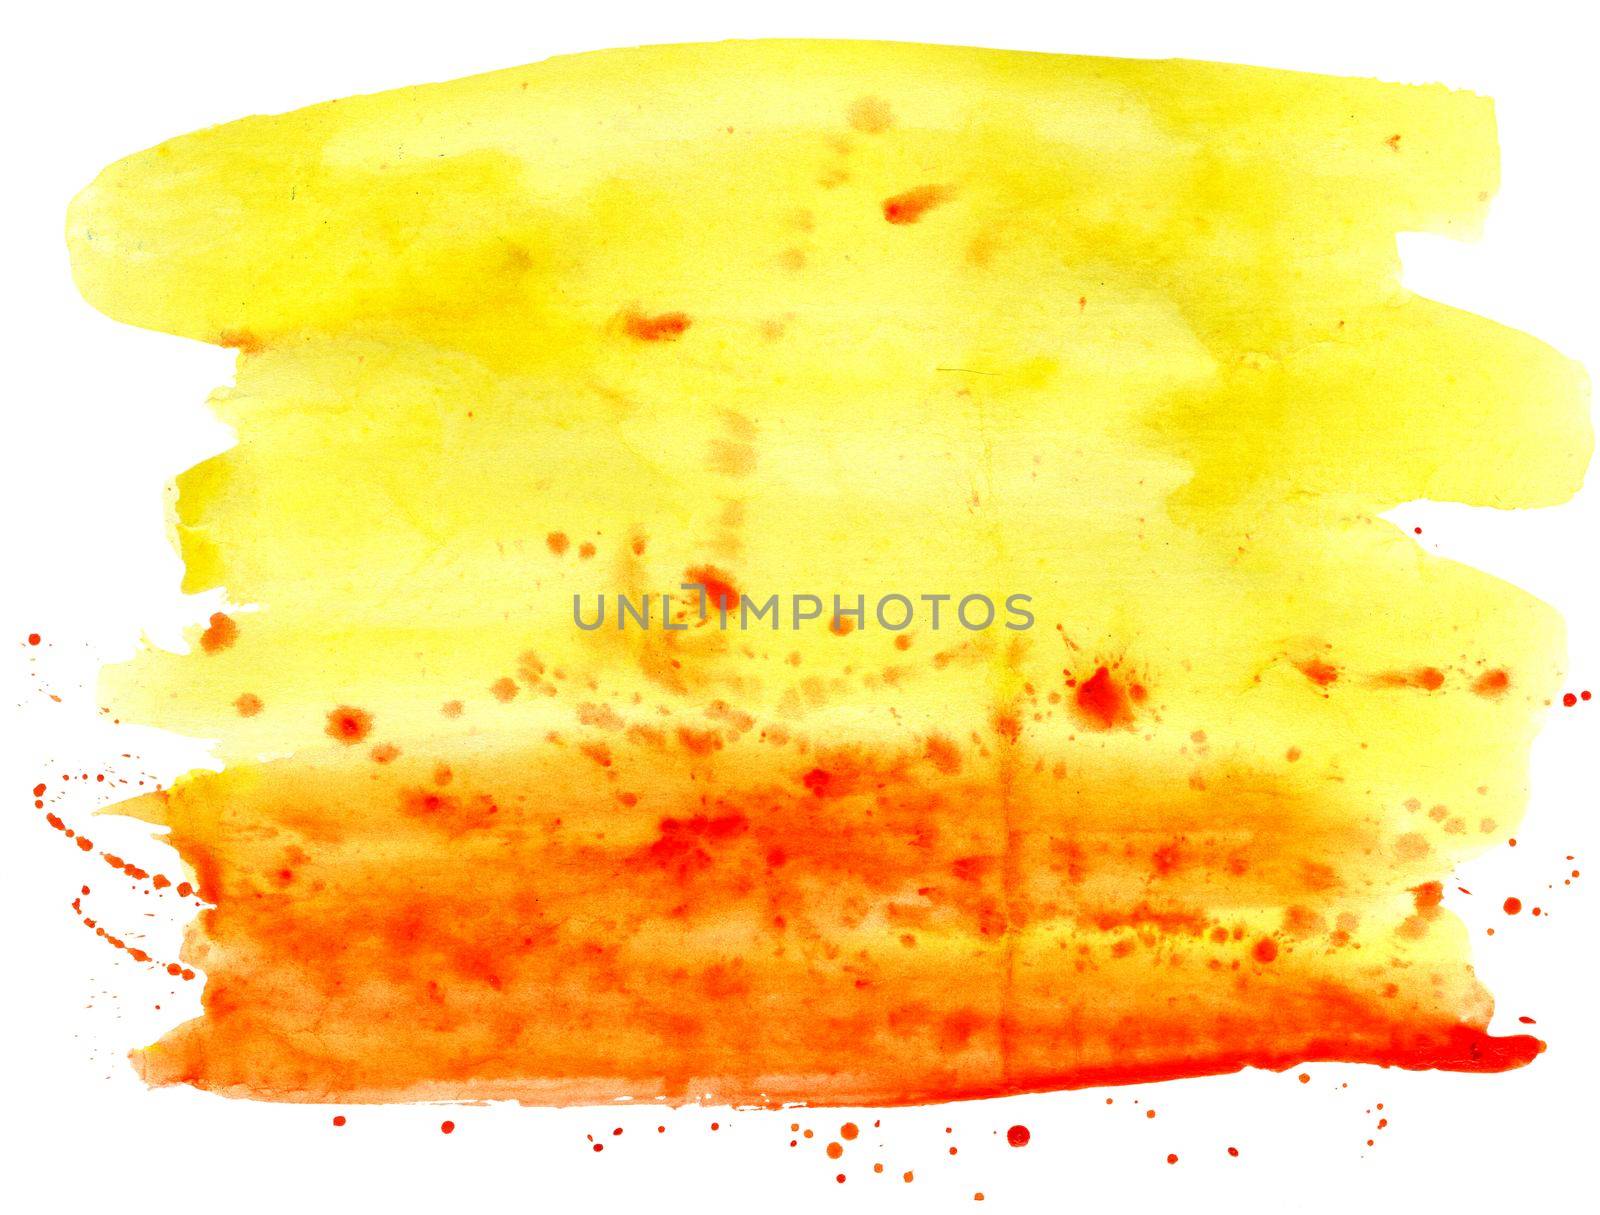 Abstract watercolor brush strokes painted background. Texture paper.